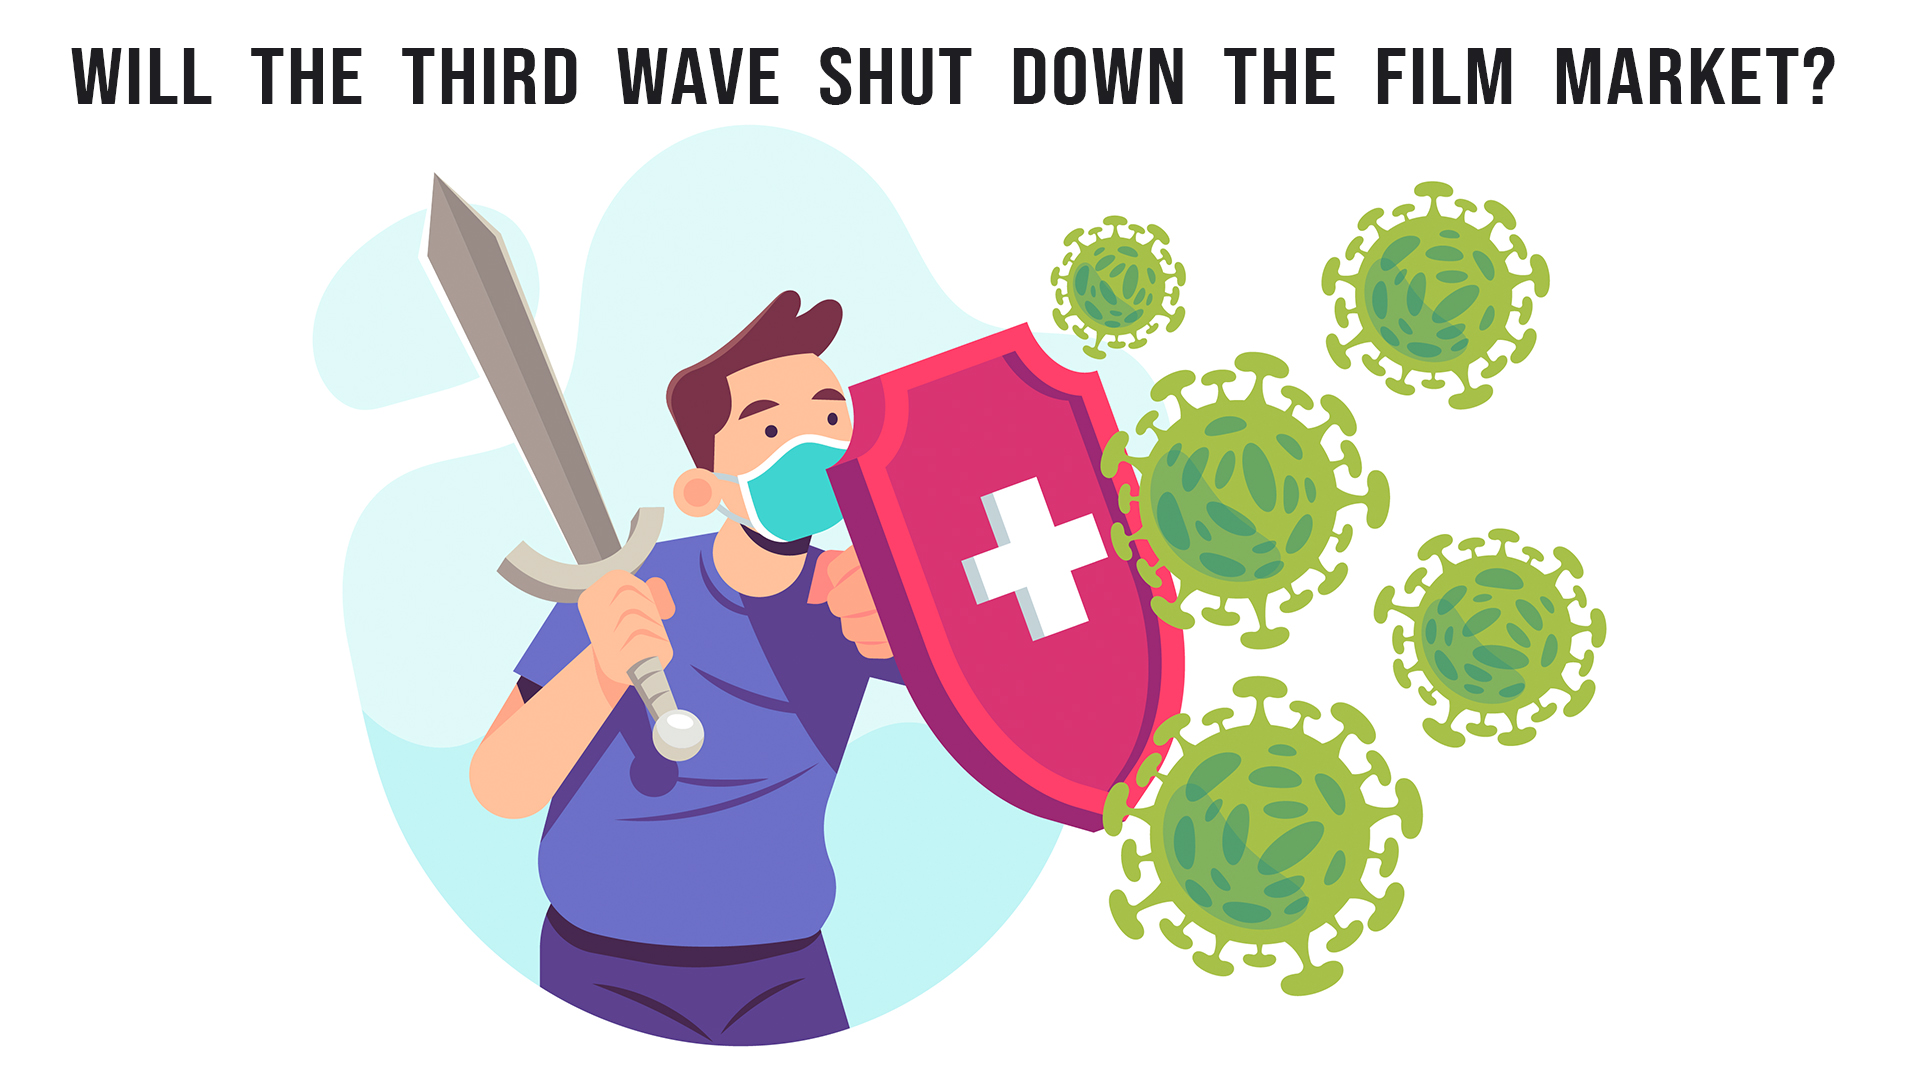 Will the third wave knock down the film market once again?